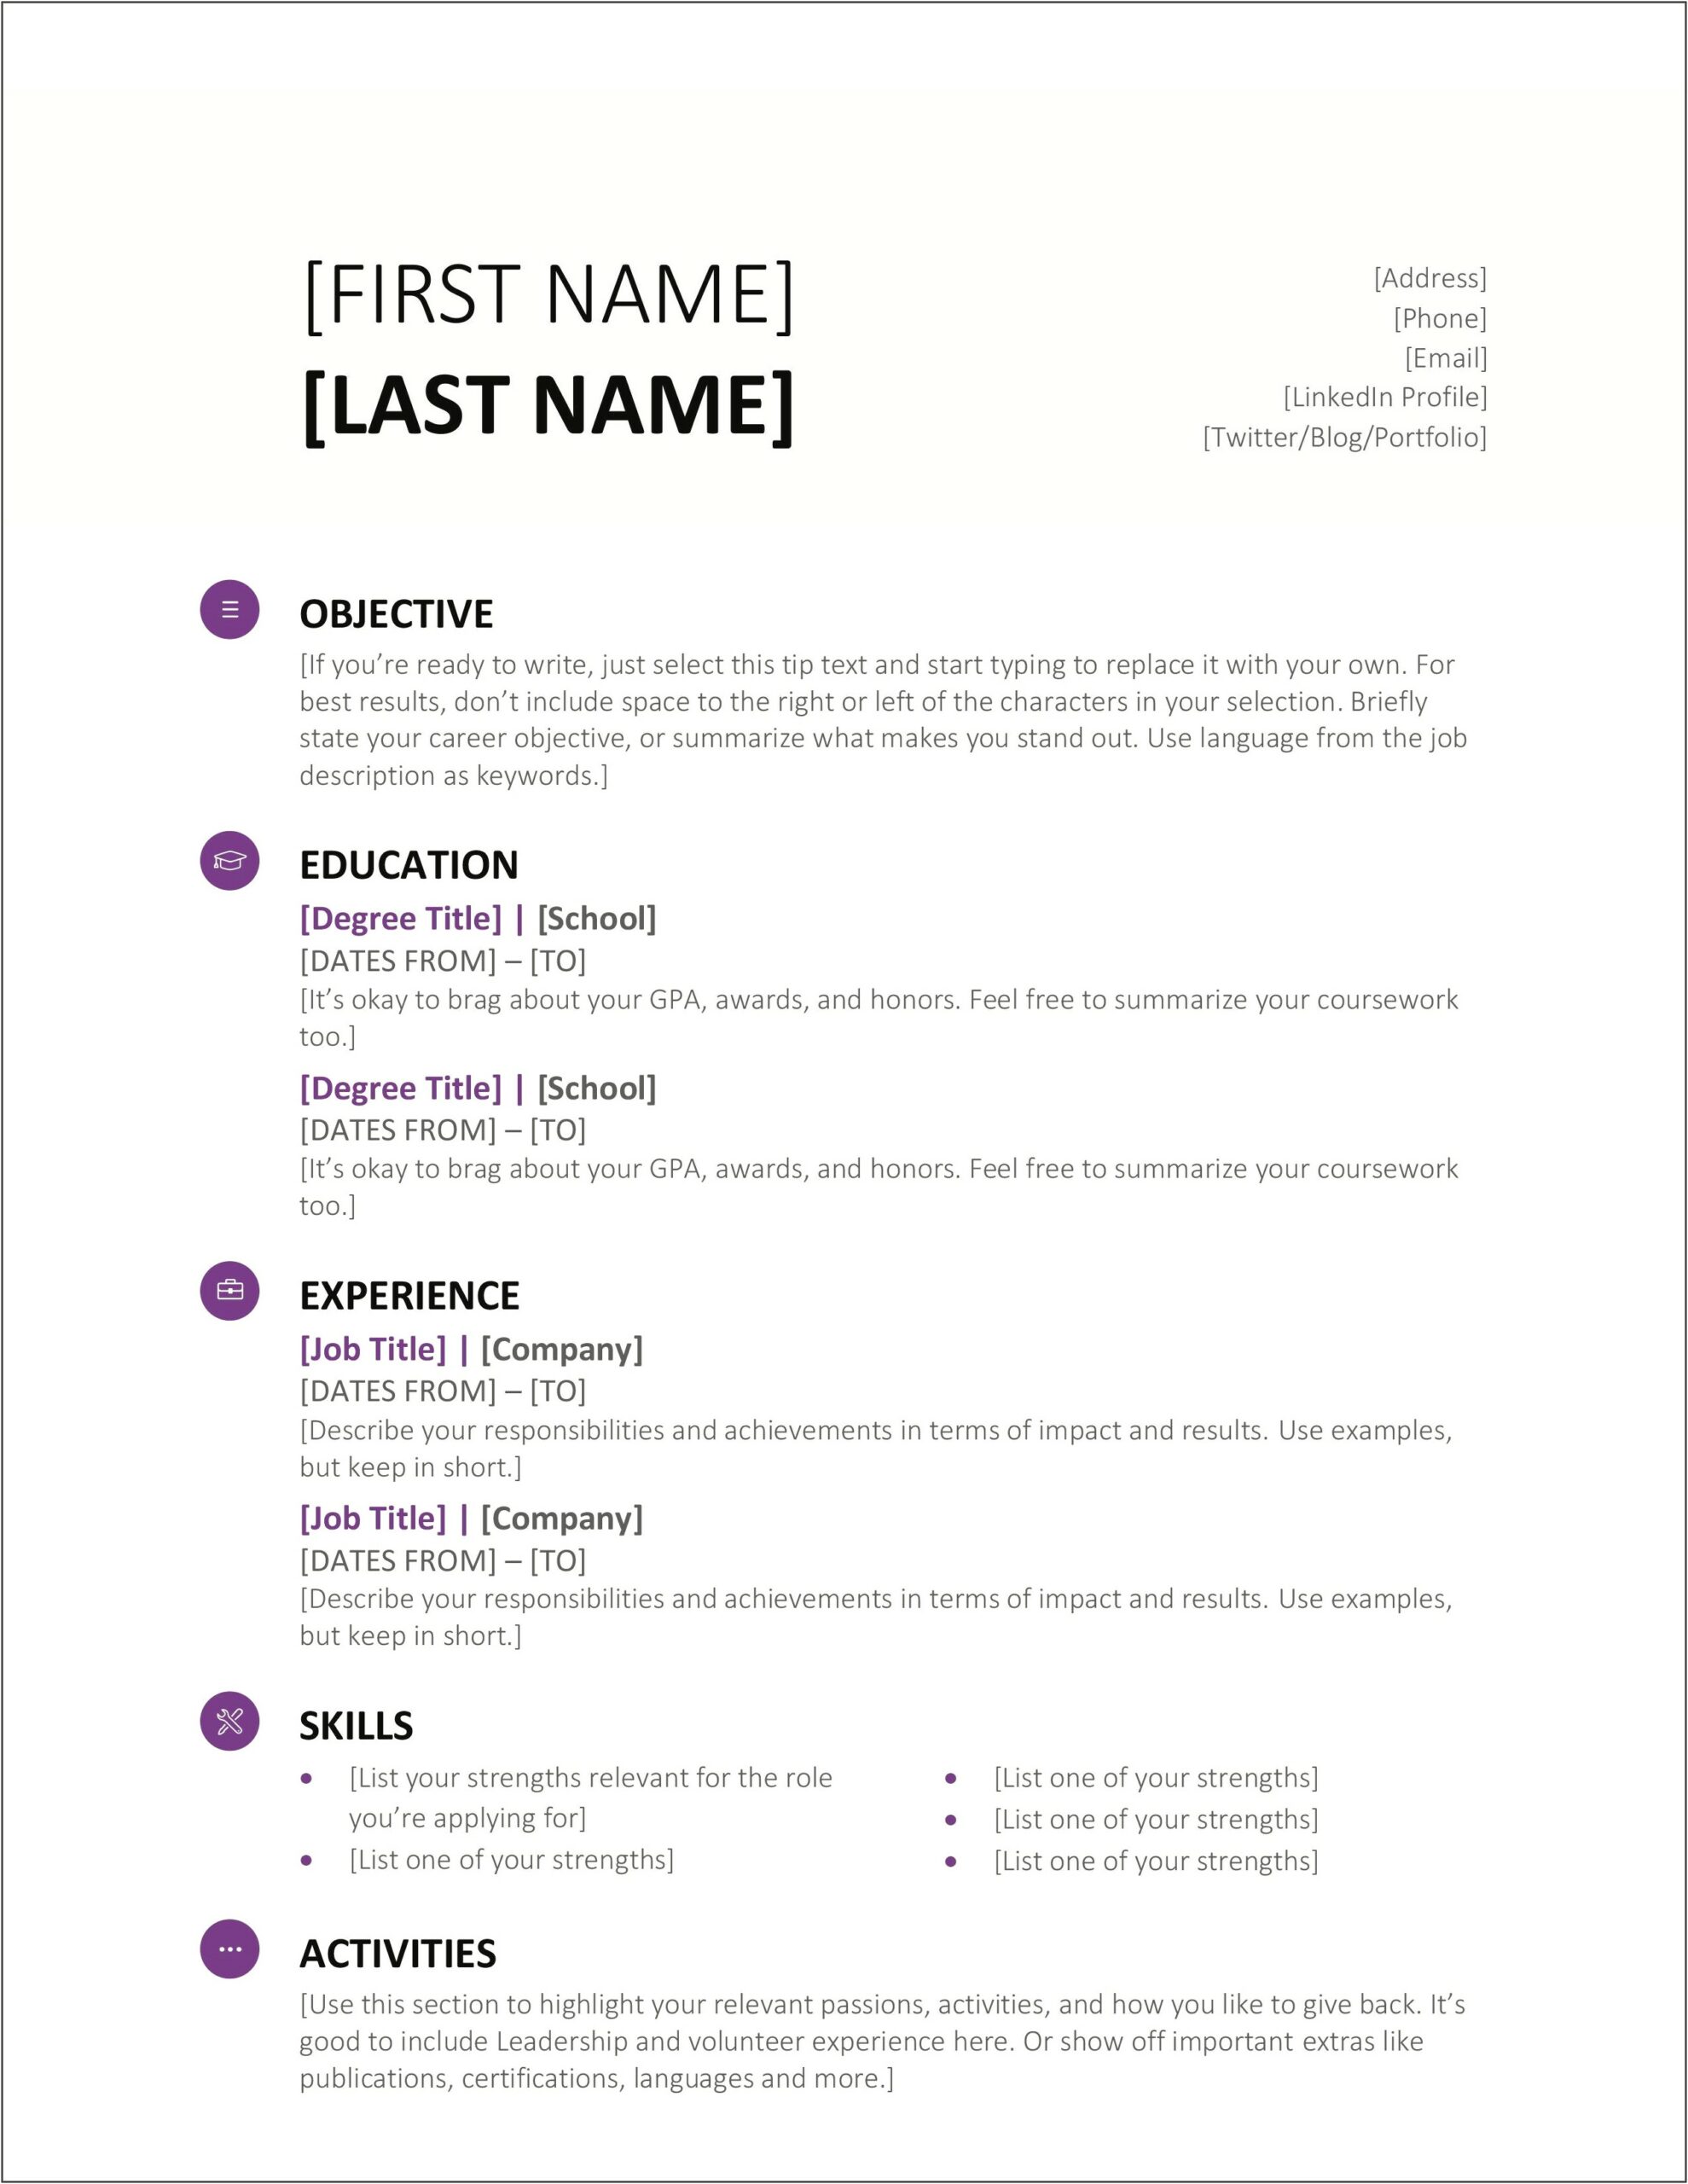 Resume Format For Freshers In Microsoft Word 2007